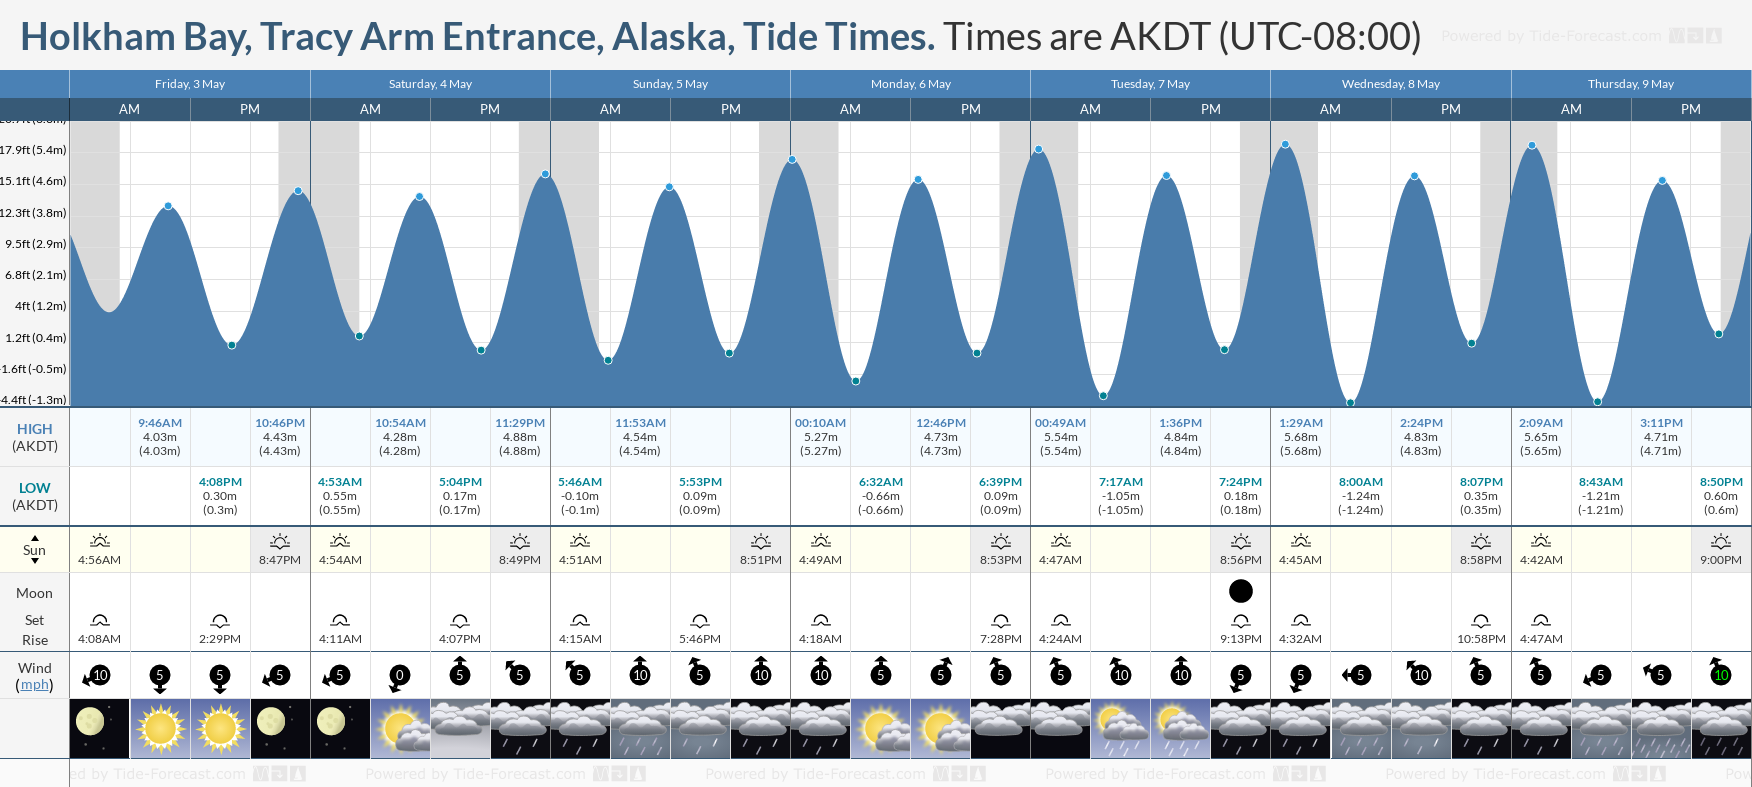 Holkham Bay, Tracy Arm Entrance, Alaska Tide Chart including high and low tide tide times for the next 7 days